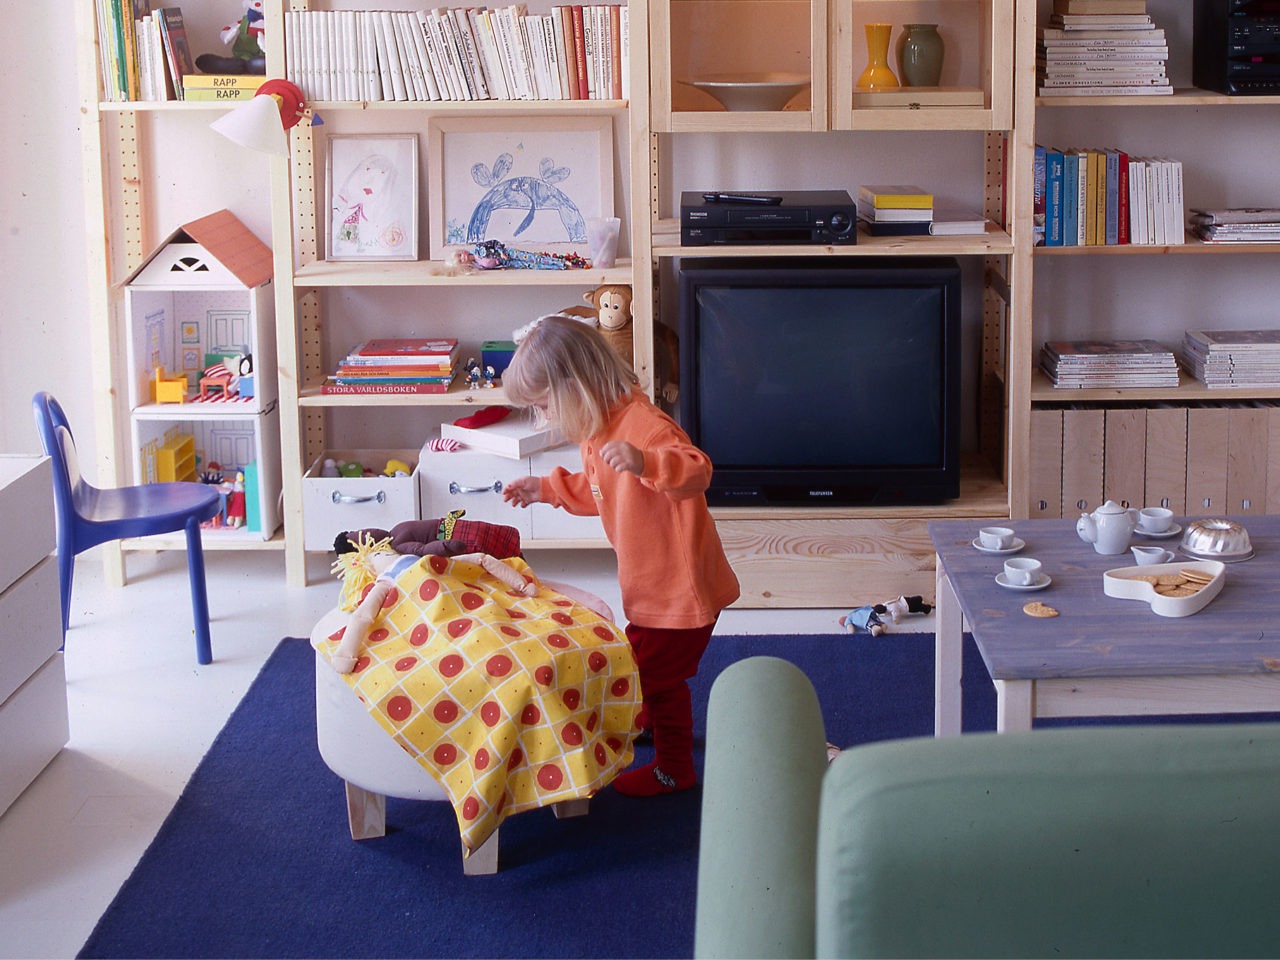 A living room where a well-filled IVAR storage combination in light wood covers the wall. A young child is playing nearby.